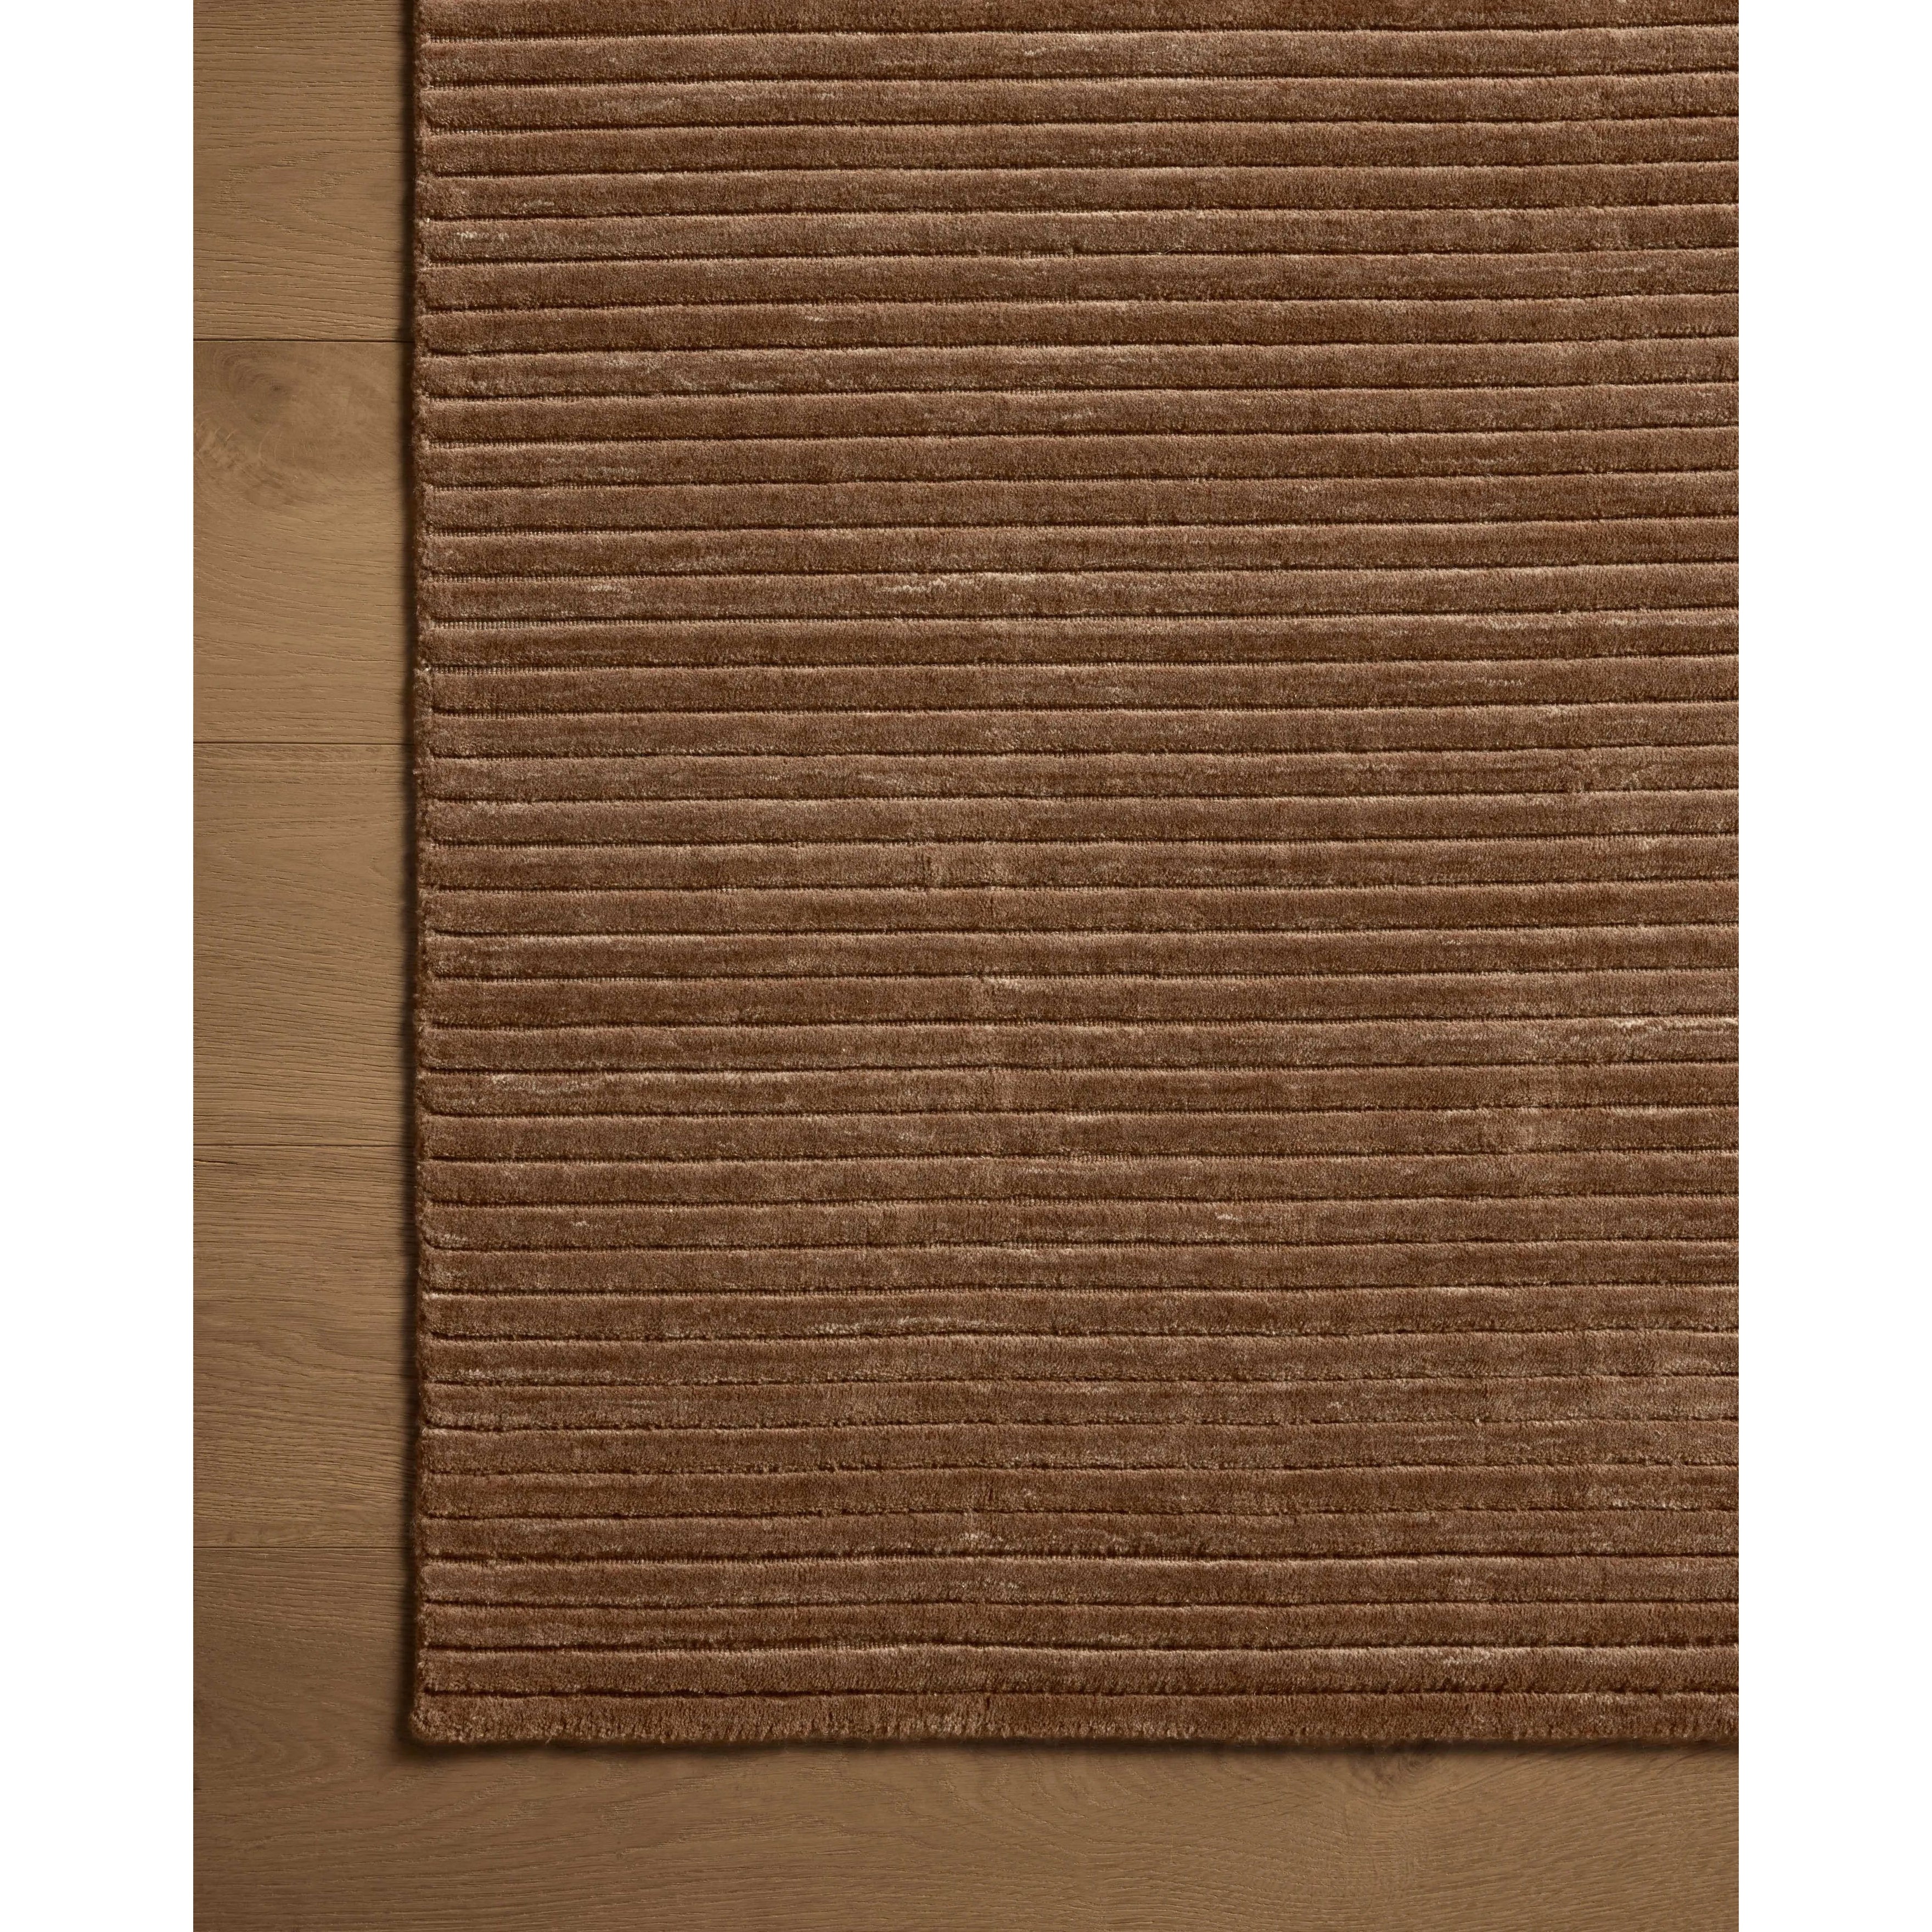 Sophisticated ribbing runs across the Sterling Mocha Rug, a nicely textured area rug with a natural color palette rich in tonality. Sterling is hand-loomed of polyester that’s refreshingly easy to clean and withstands high-traffic in living rooms, dining rooms, or bedrooms. Amethyst Home provides interior design, new home construction design consulting, vintage area rugs, and lighting in the Monterey metro area.